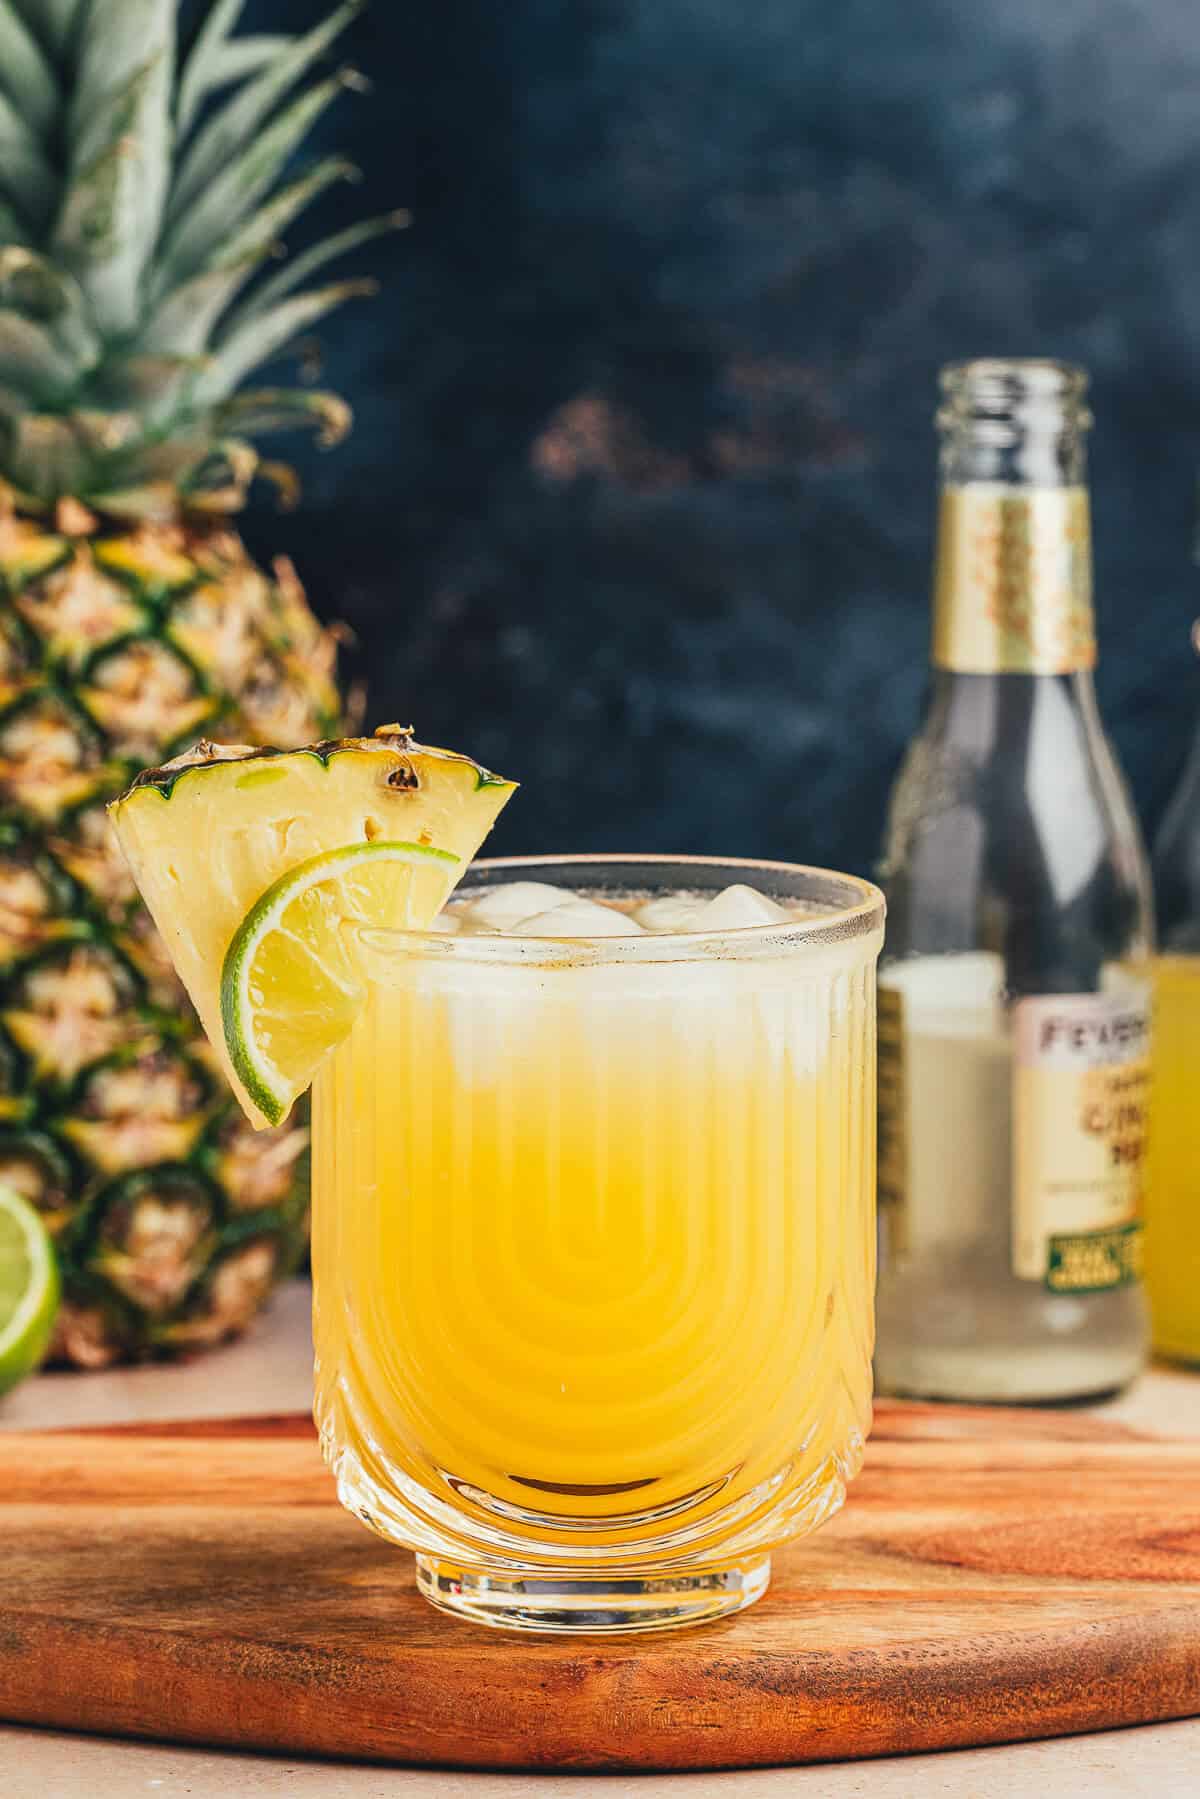 Glass of ginger beer with pineapple on a wooden serving board. A pineapple and empty bottle of gingerbeer stand in the background.